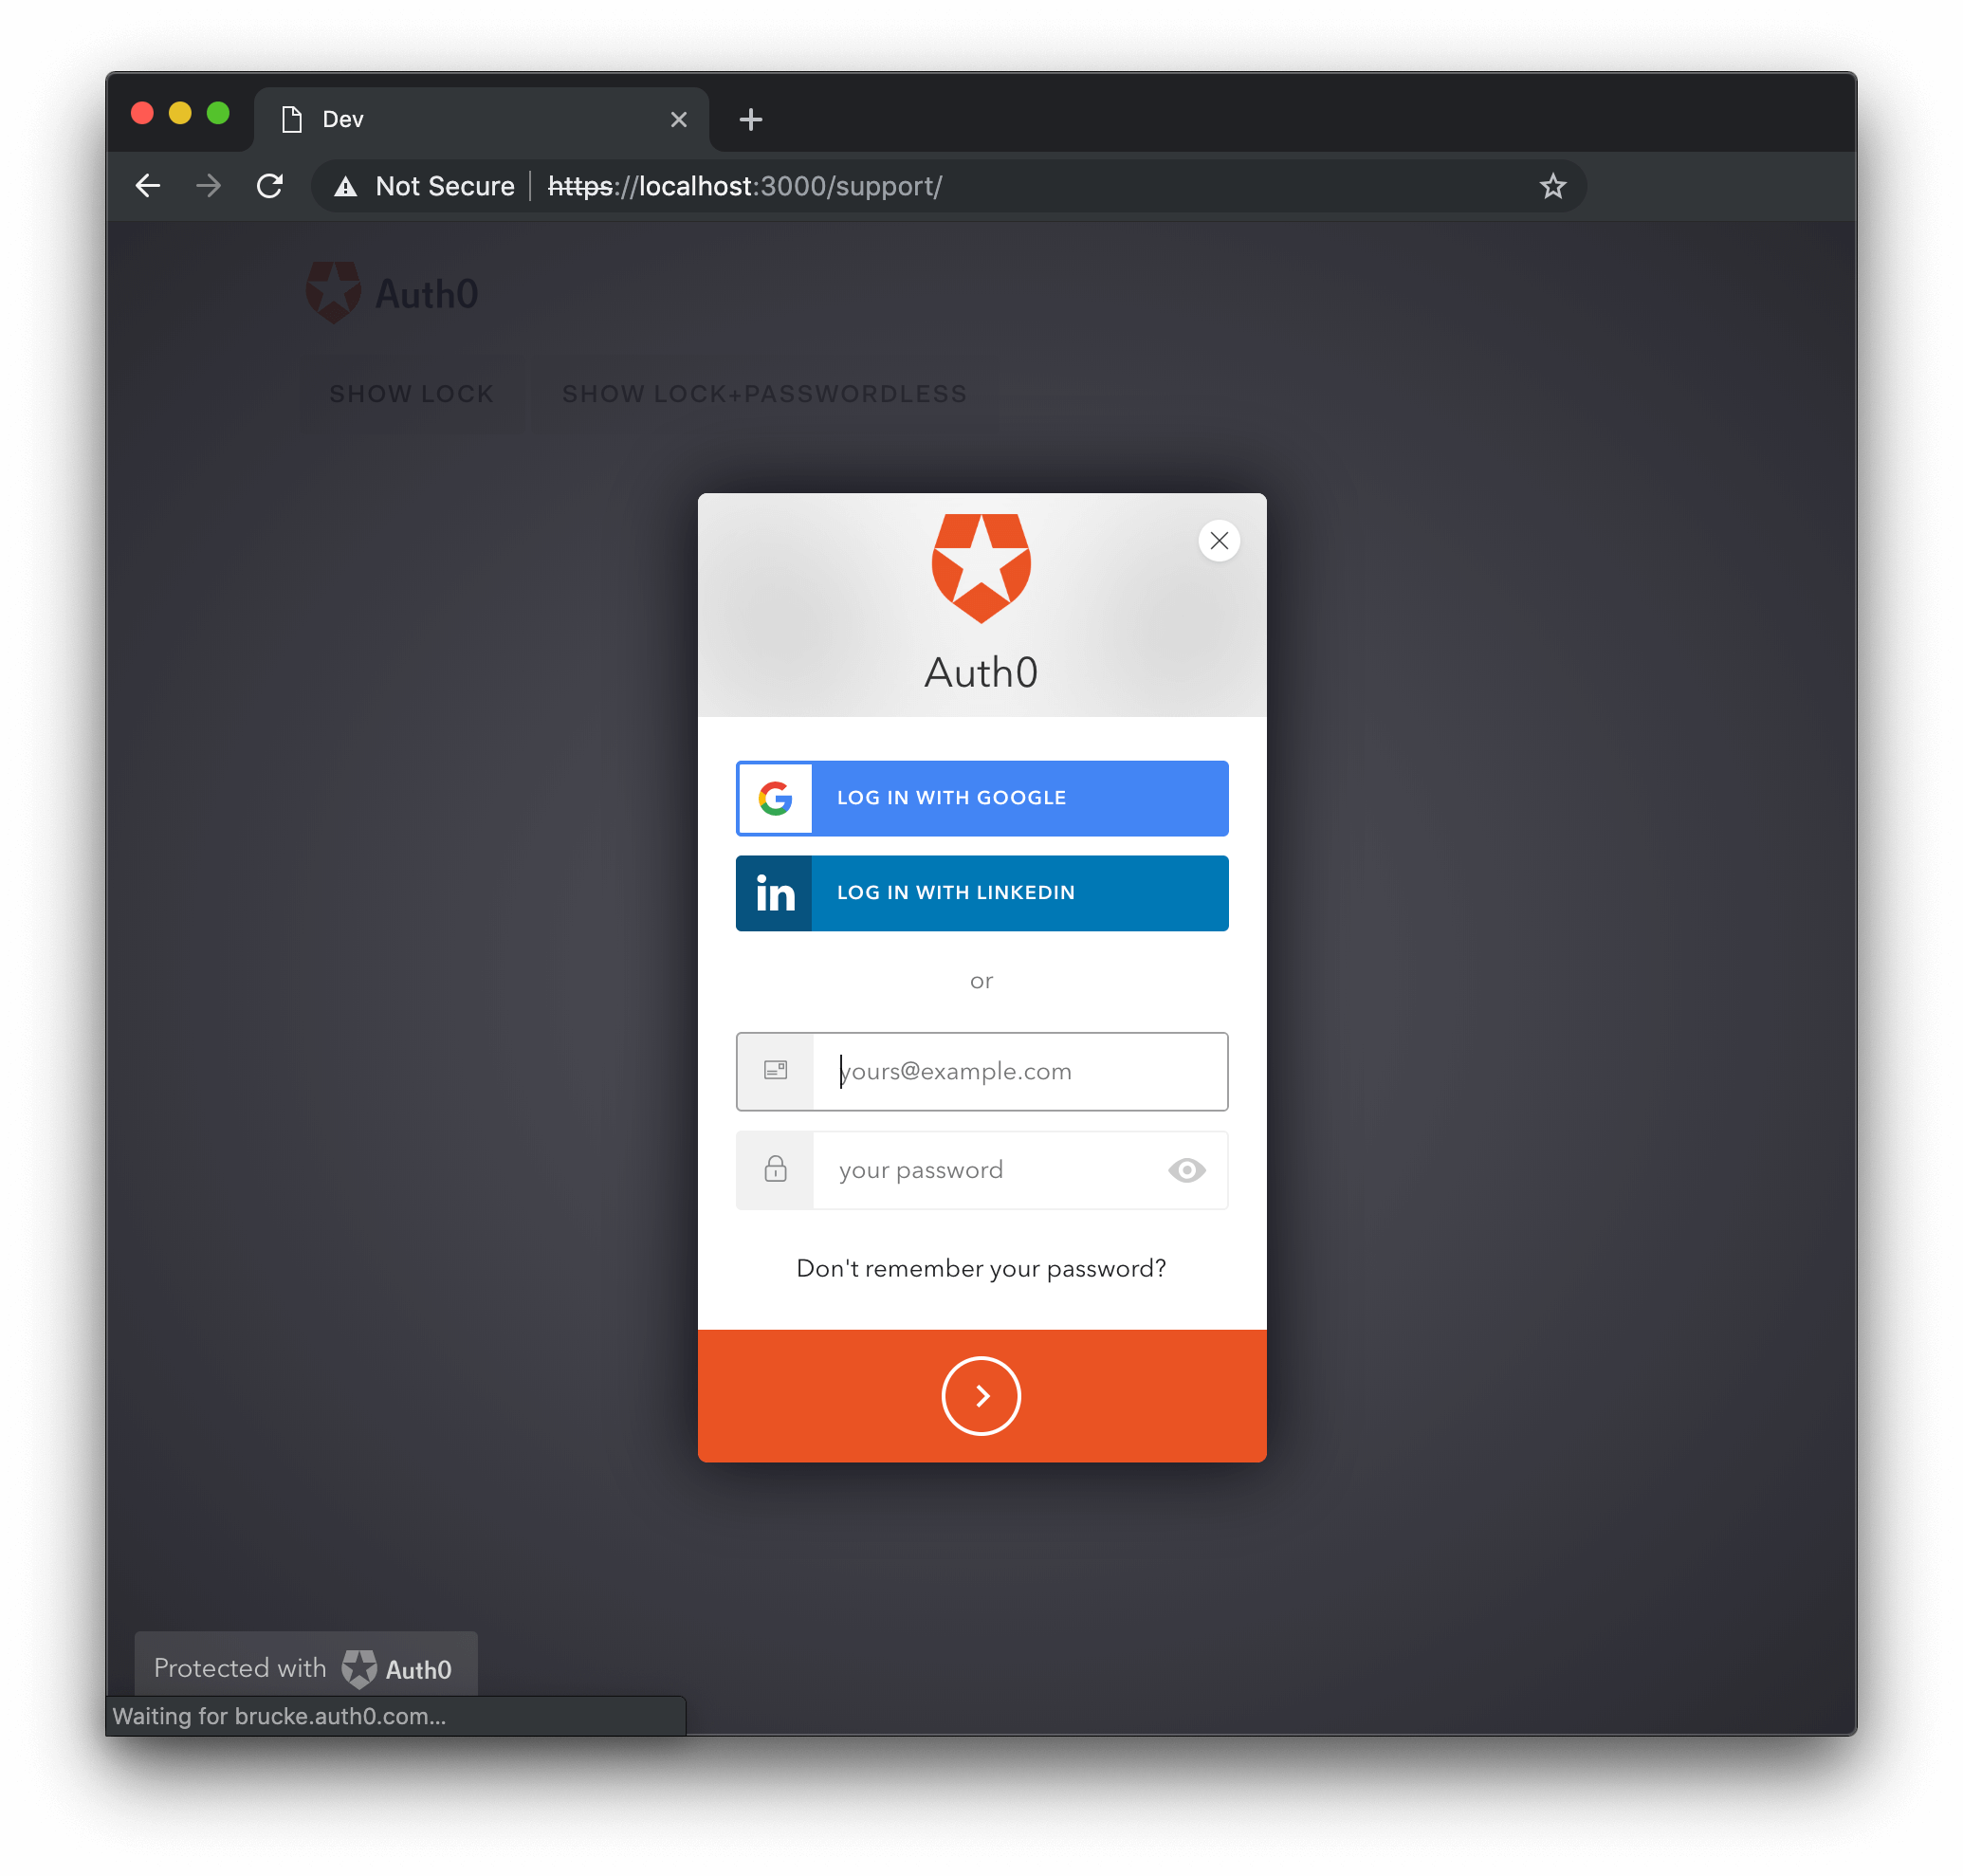 Lock Option: Allow Signup